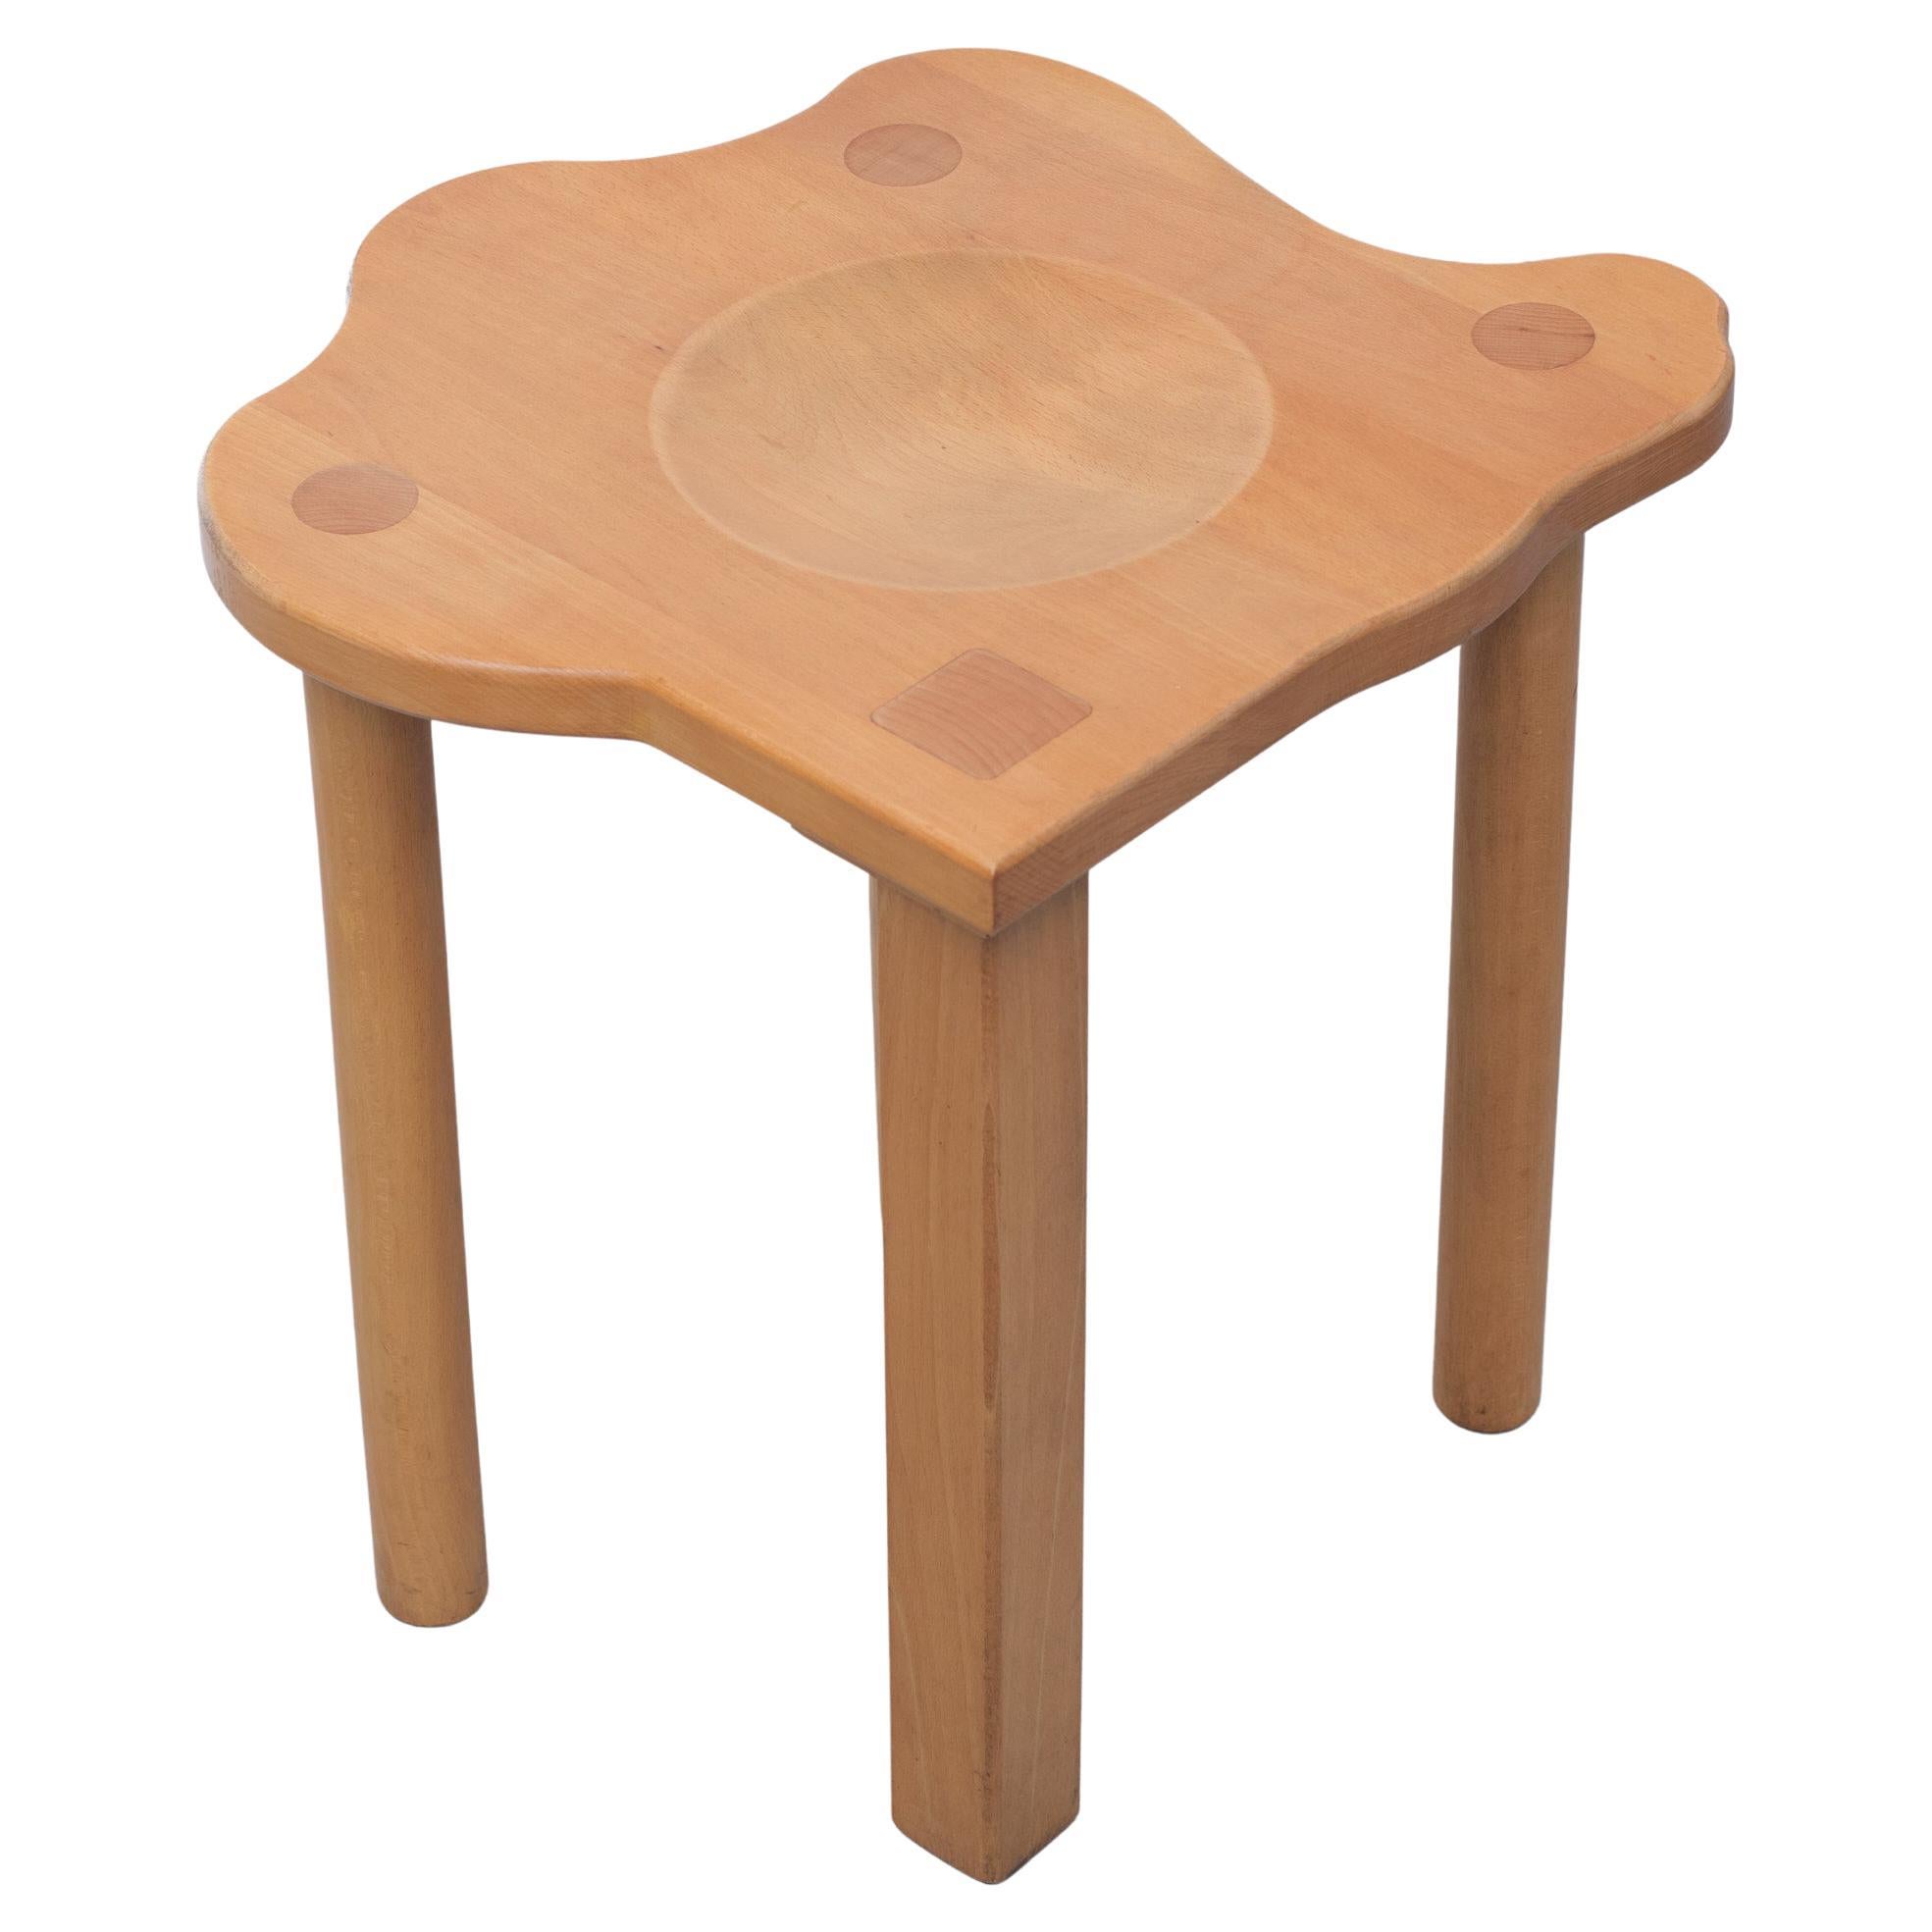 Era Herbstb Solid Pine Wood Stool For Sale